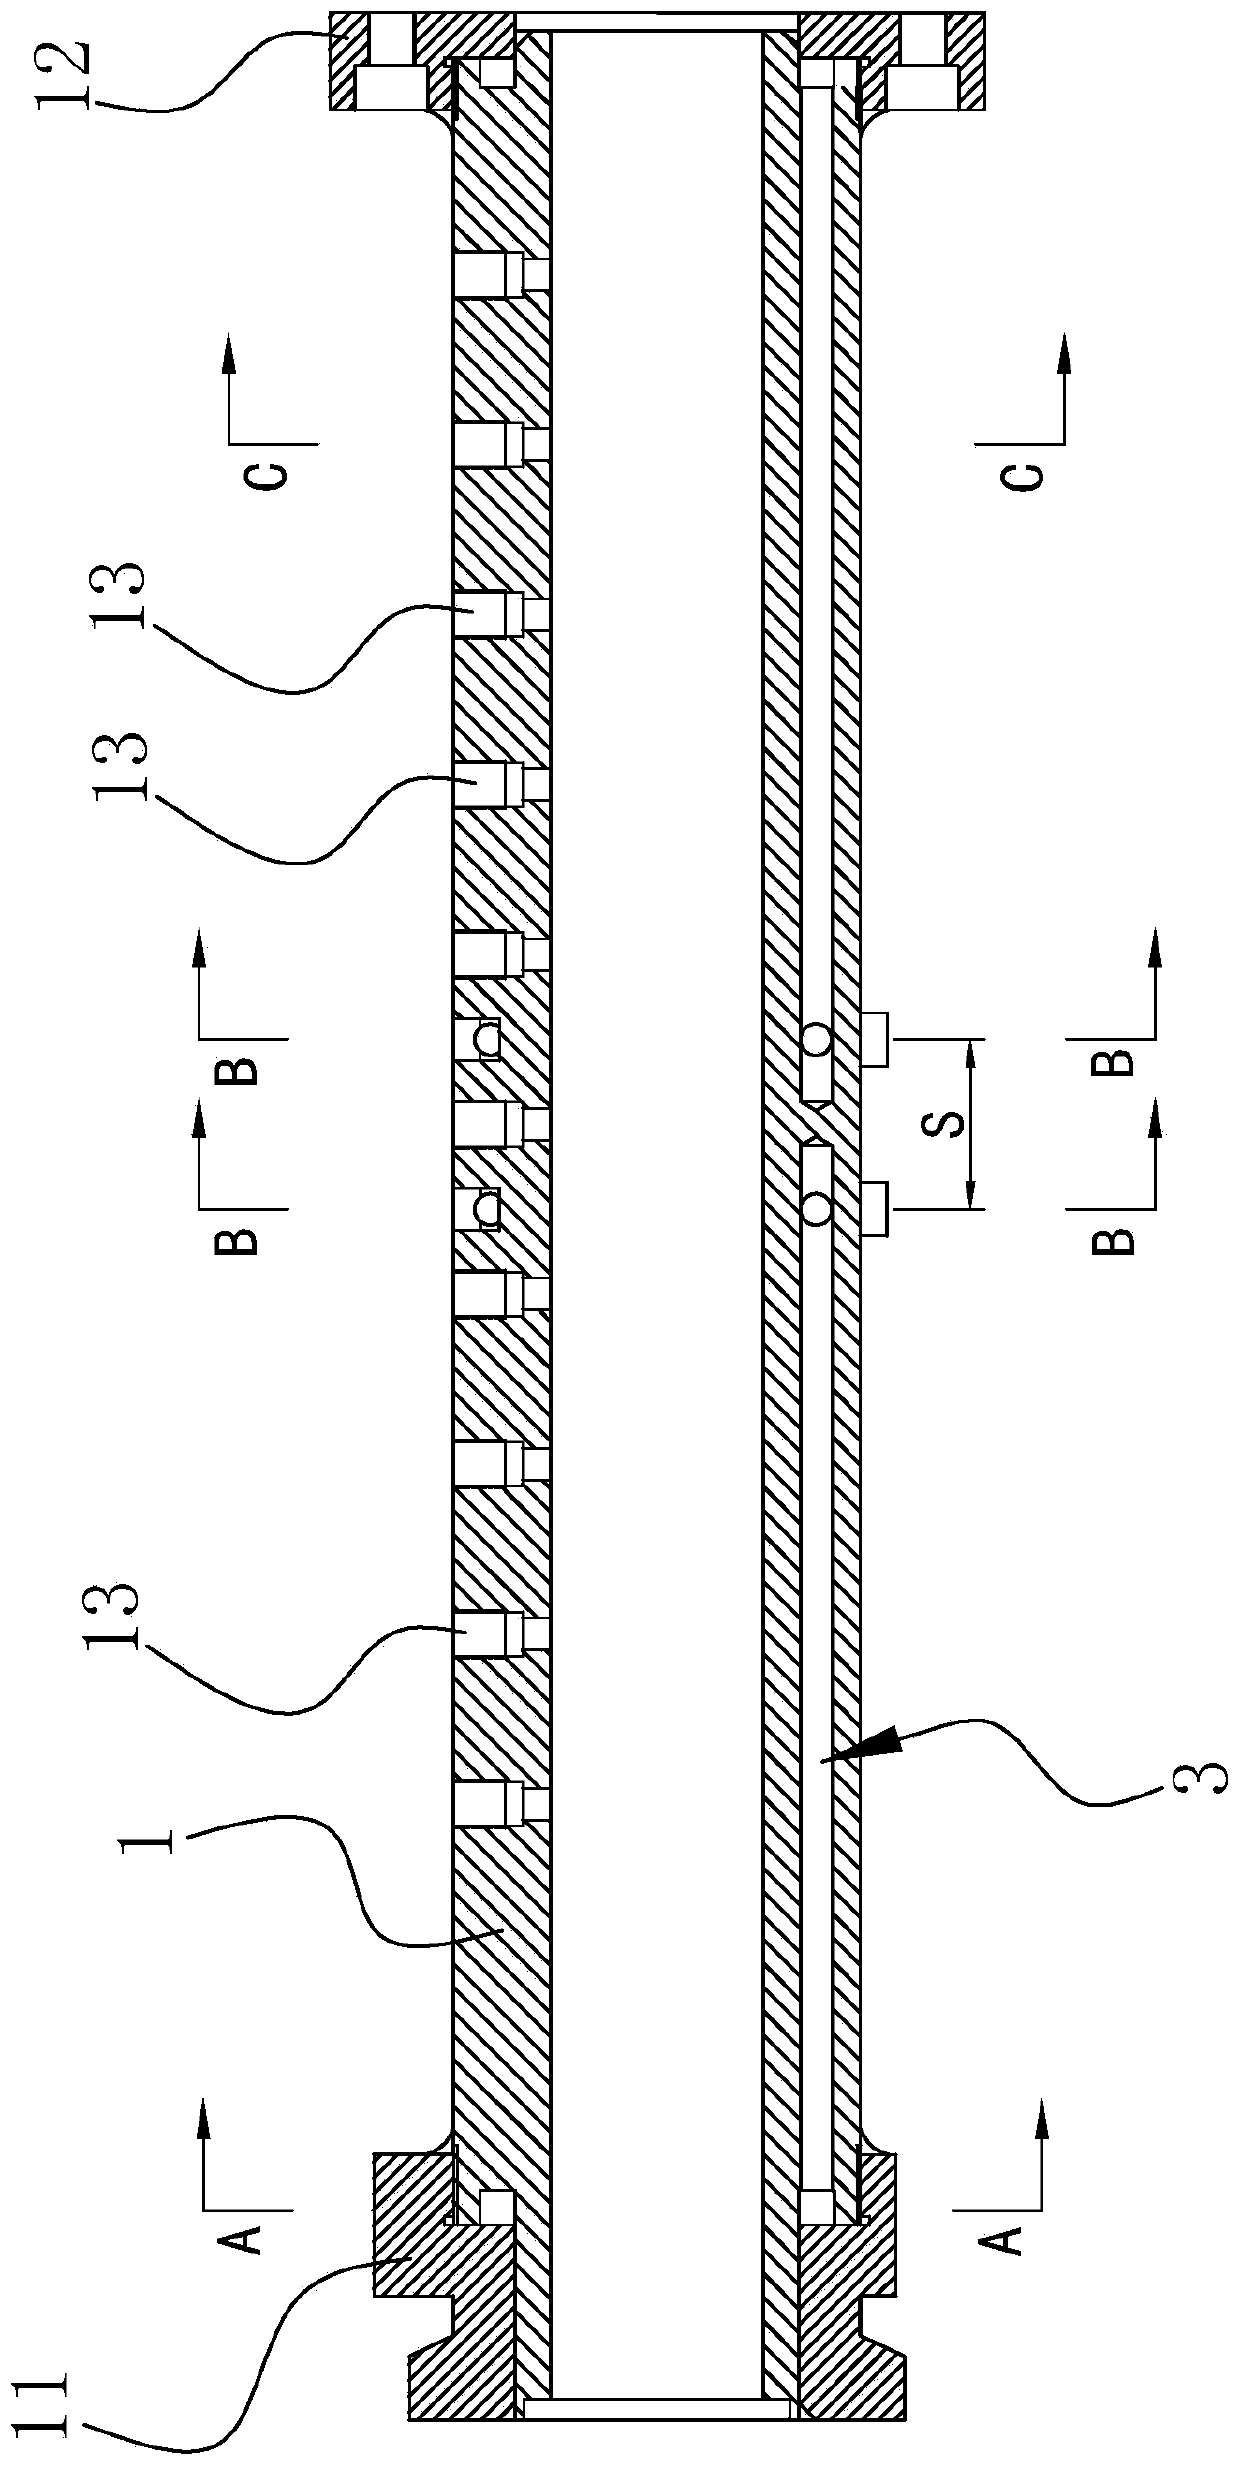 Machine cylinder structure capable of adjusting temperature of machine cylinder uniformly